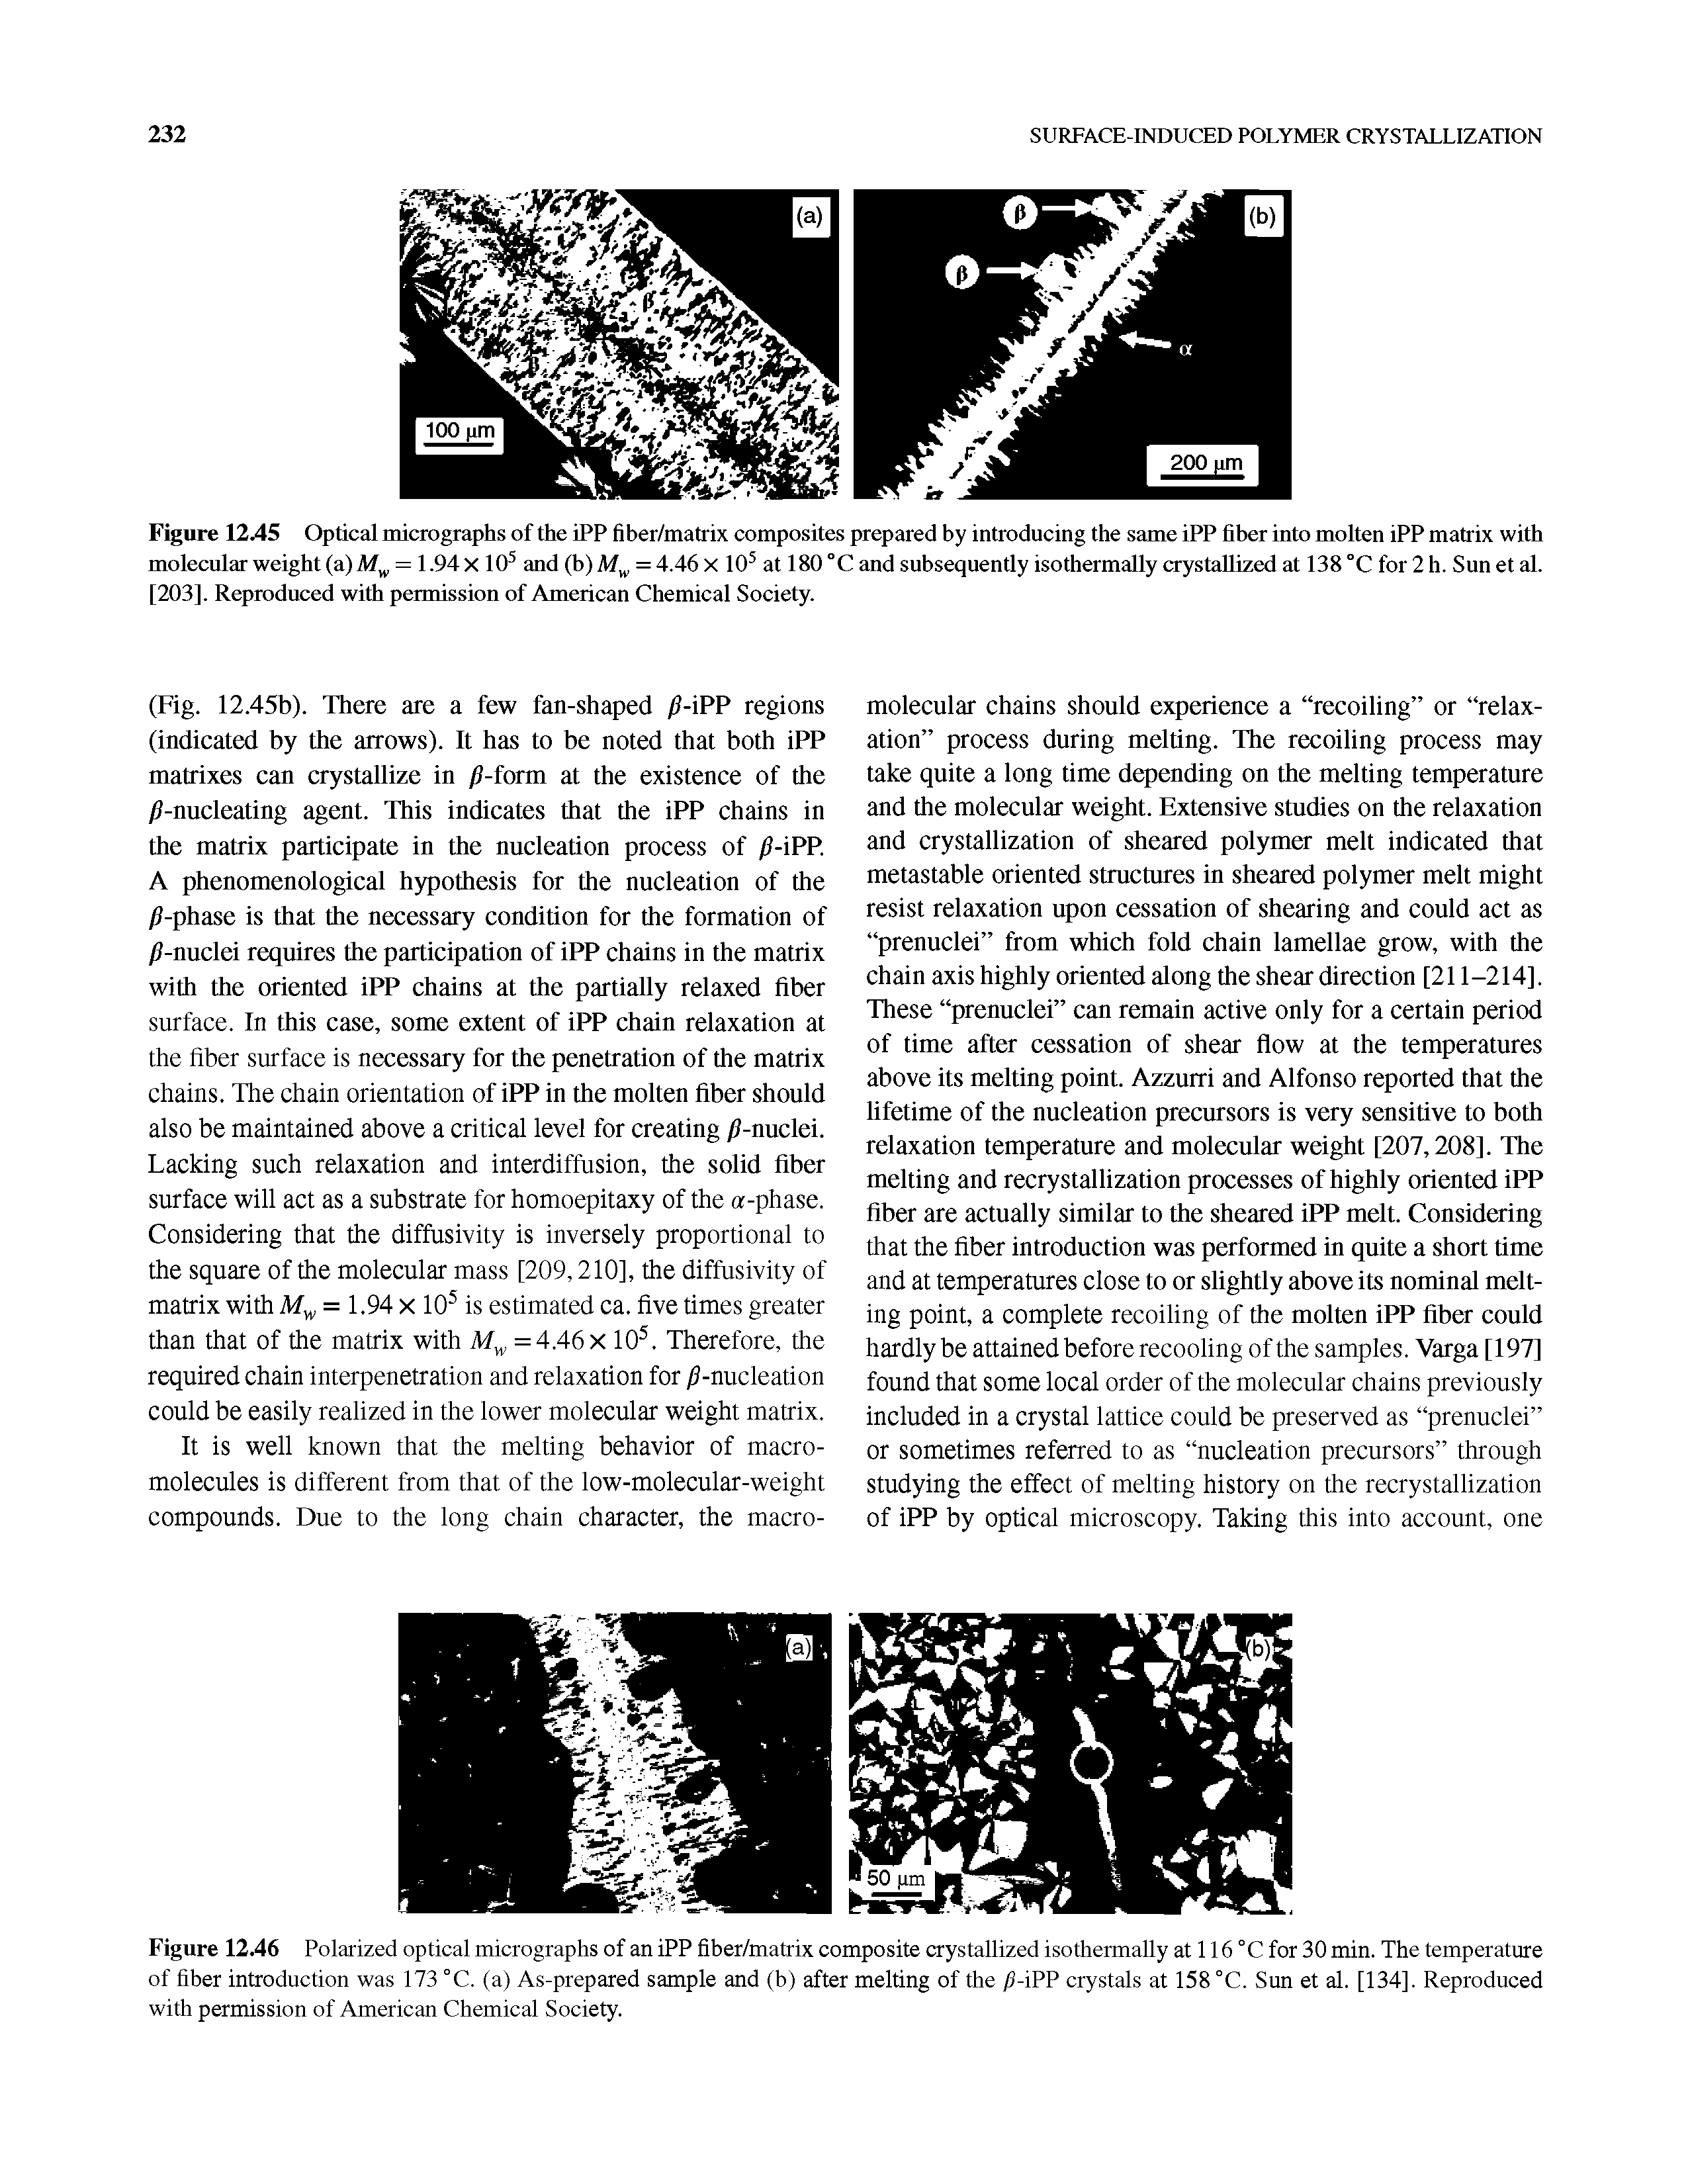 Figure 1245 Optical micrographs of the iPP fiber/matrix composites prepared by introducing the same iPP fiber into molten iPP matrix with molecular weight (a) = 1.94 X 10 and (b) = 4.46 X 10 at 180°CandsubsequentlyisothermaUy crystallized at 138 °C for2h. Sunetal.